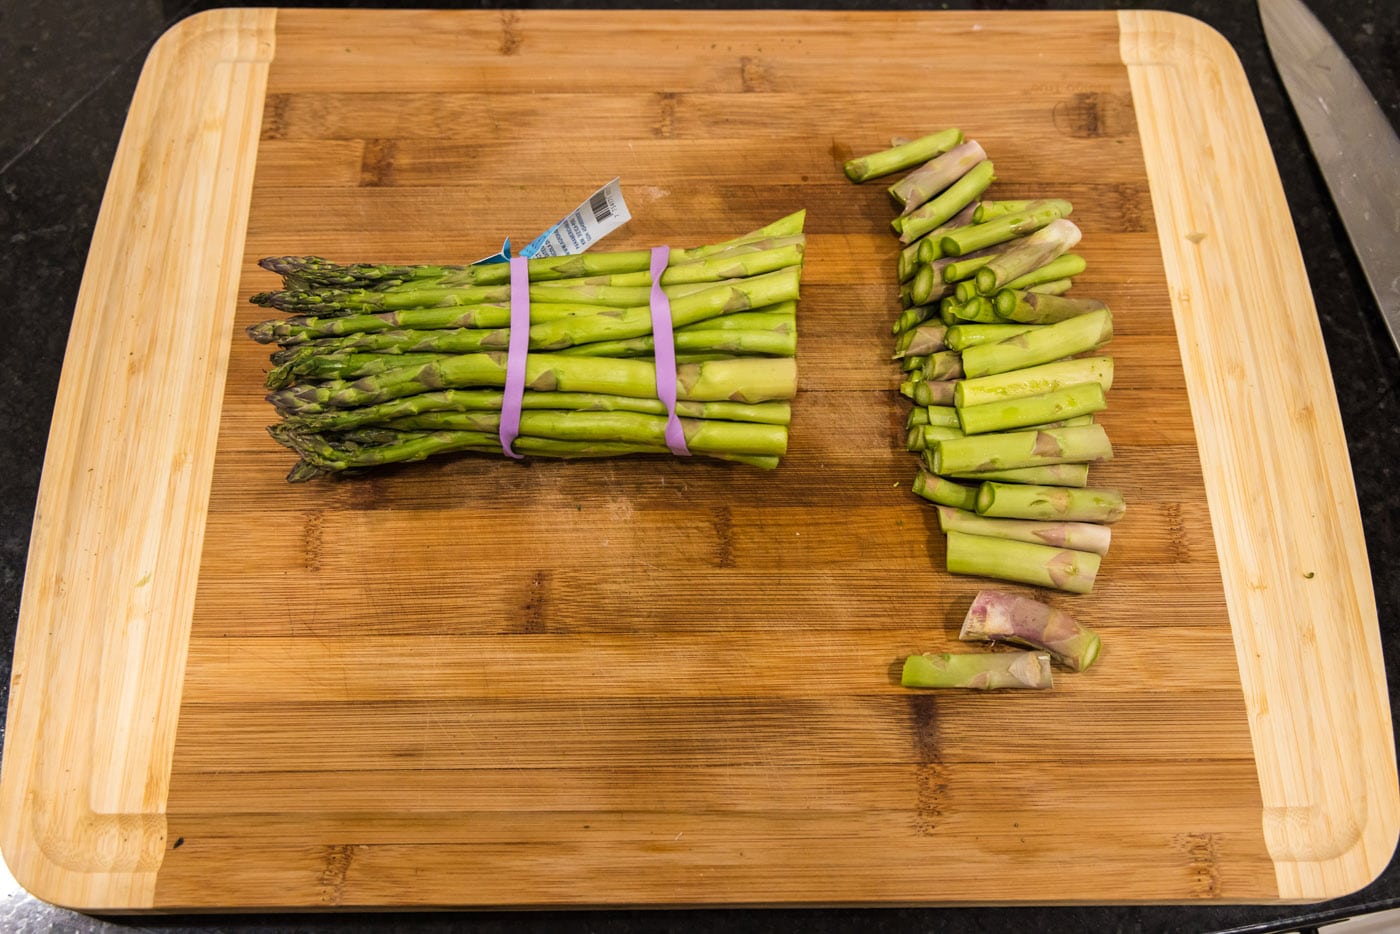 trimming the ends off asparagus